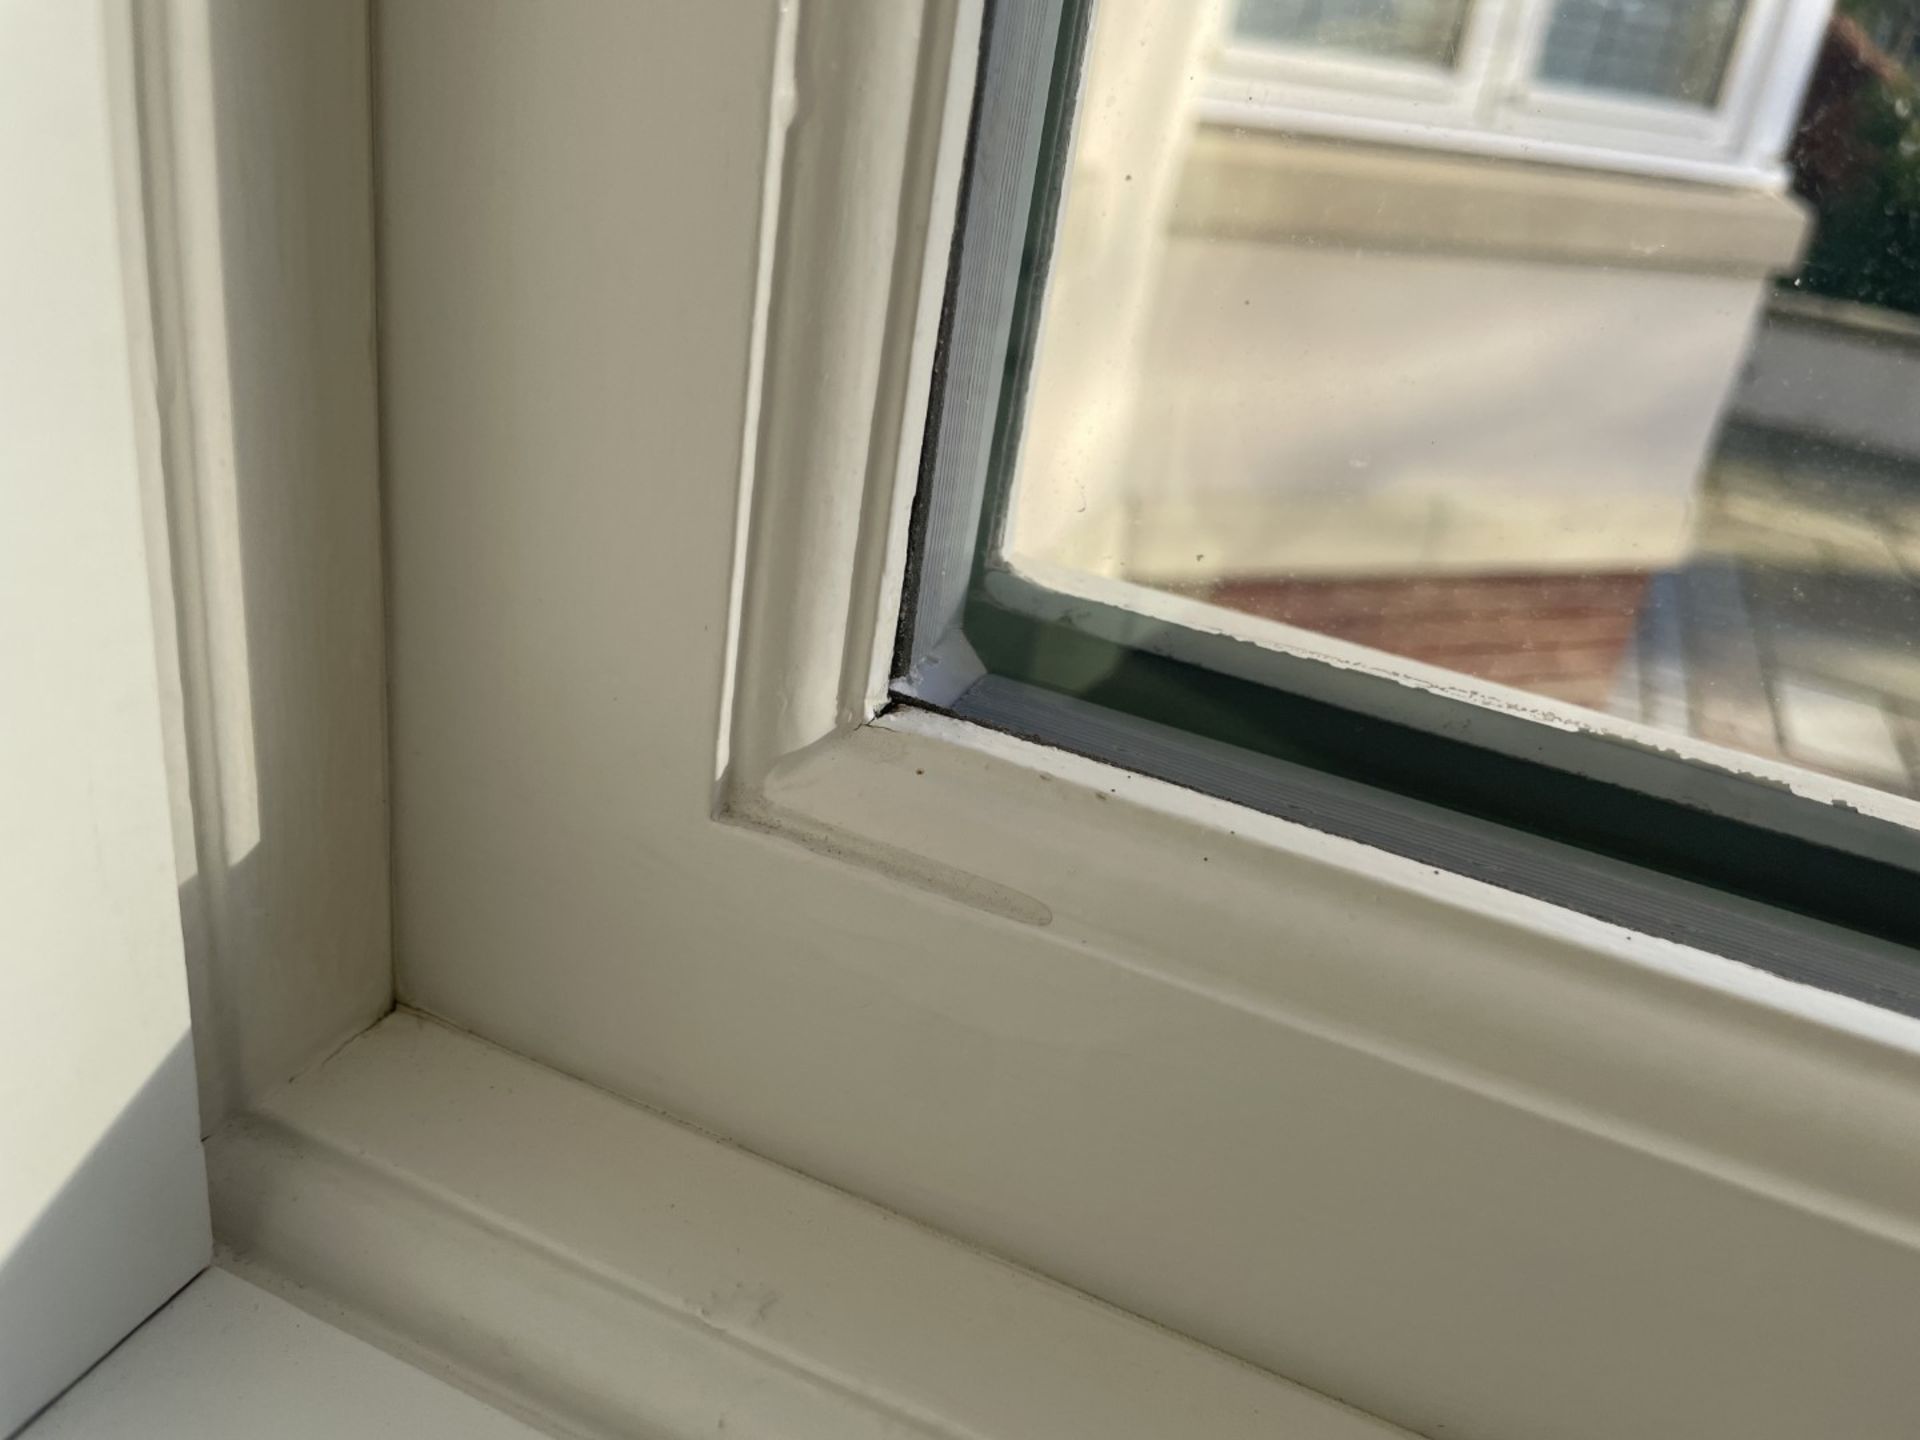 1 x Hardwood Timber Double Glazed Window Frames fitted with Shutter Blinds, In White - Ref: PAN106 - Image 21 of 23